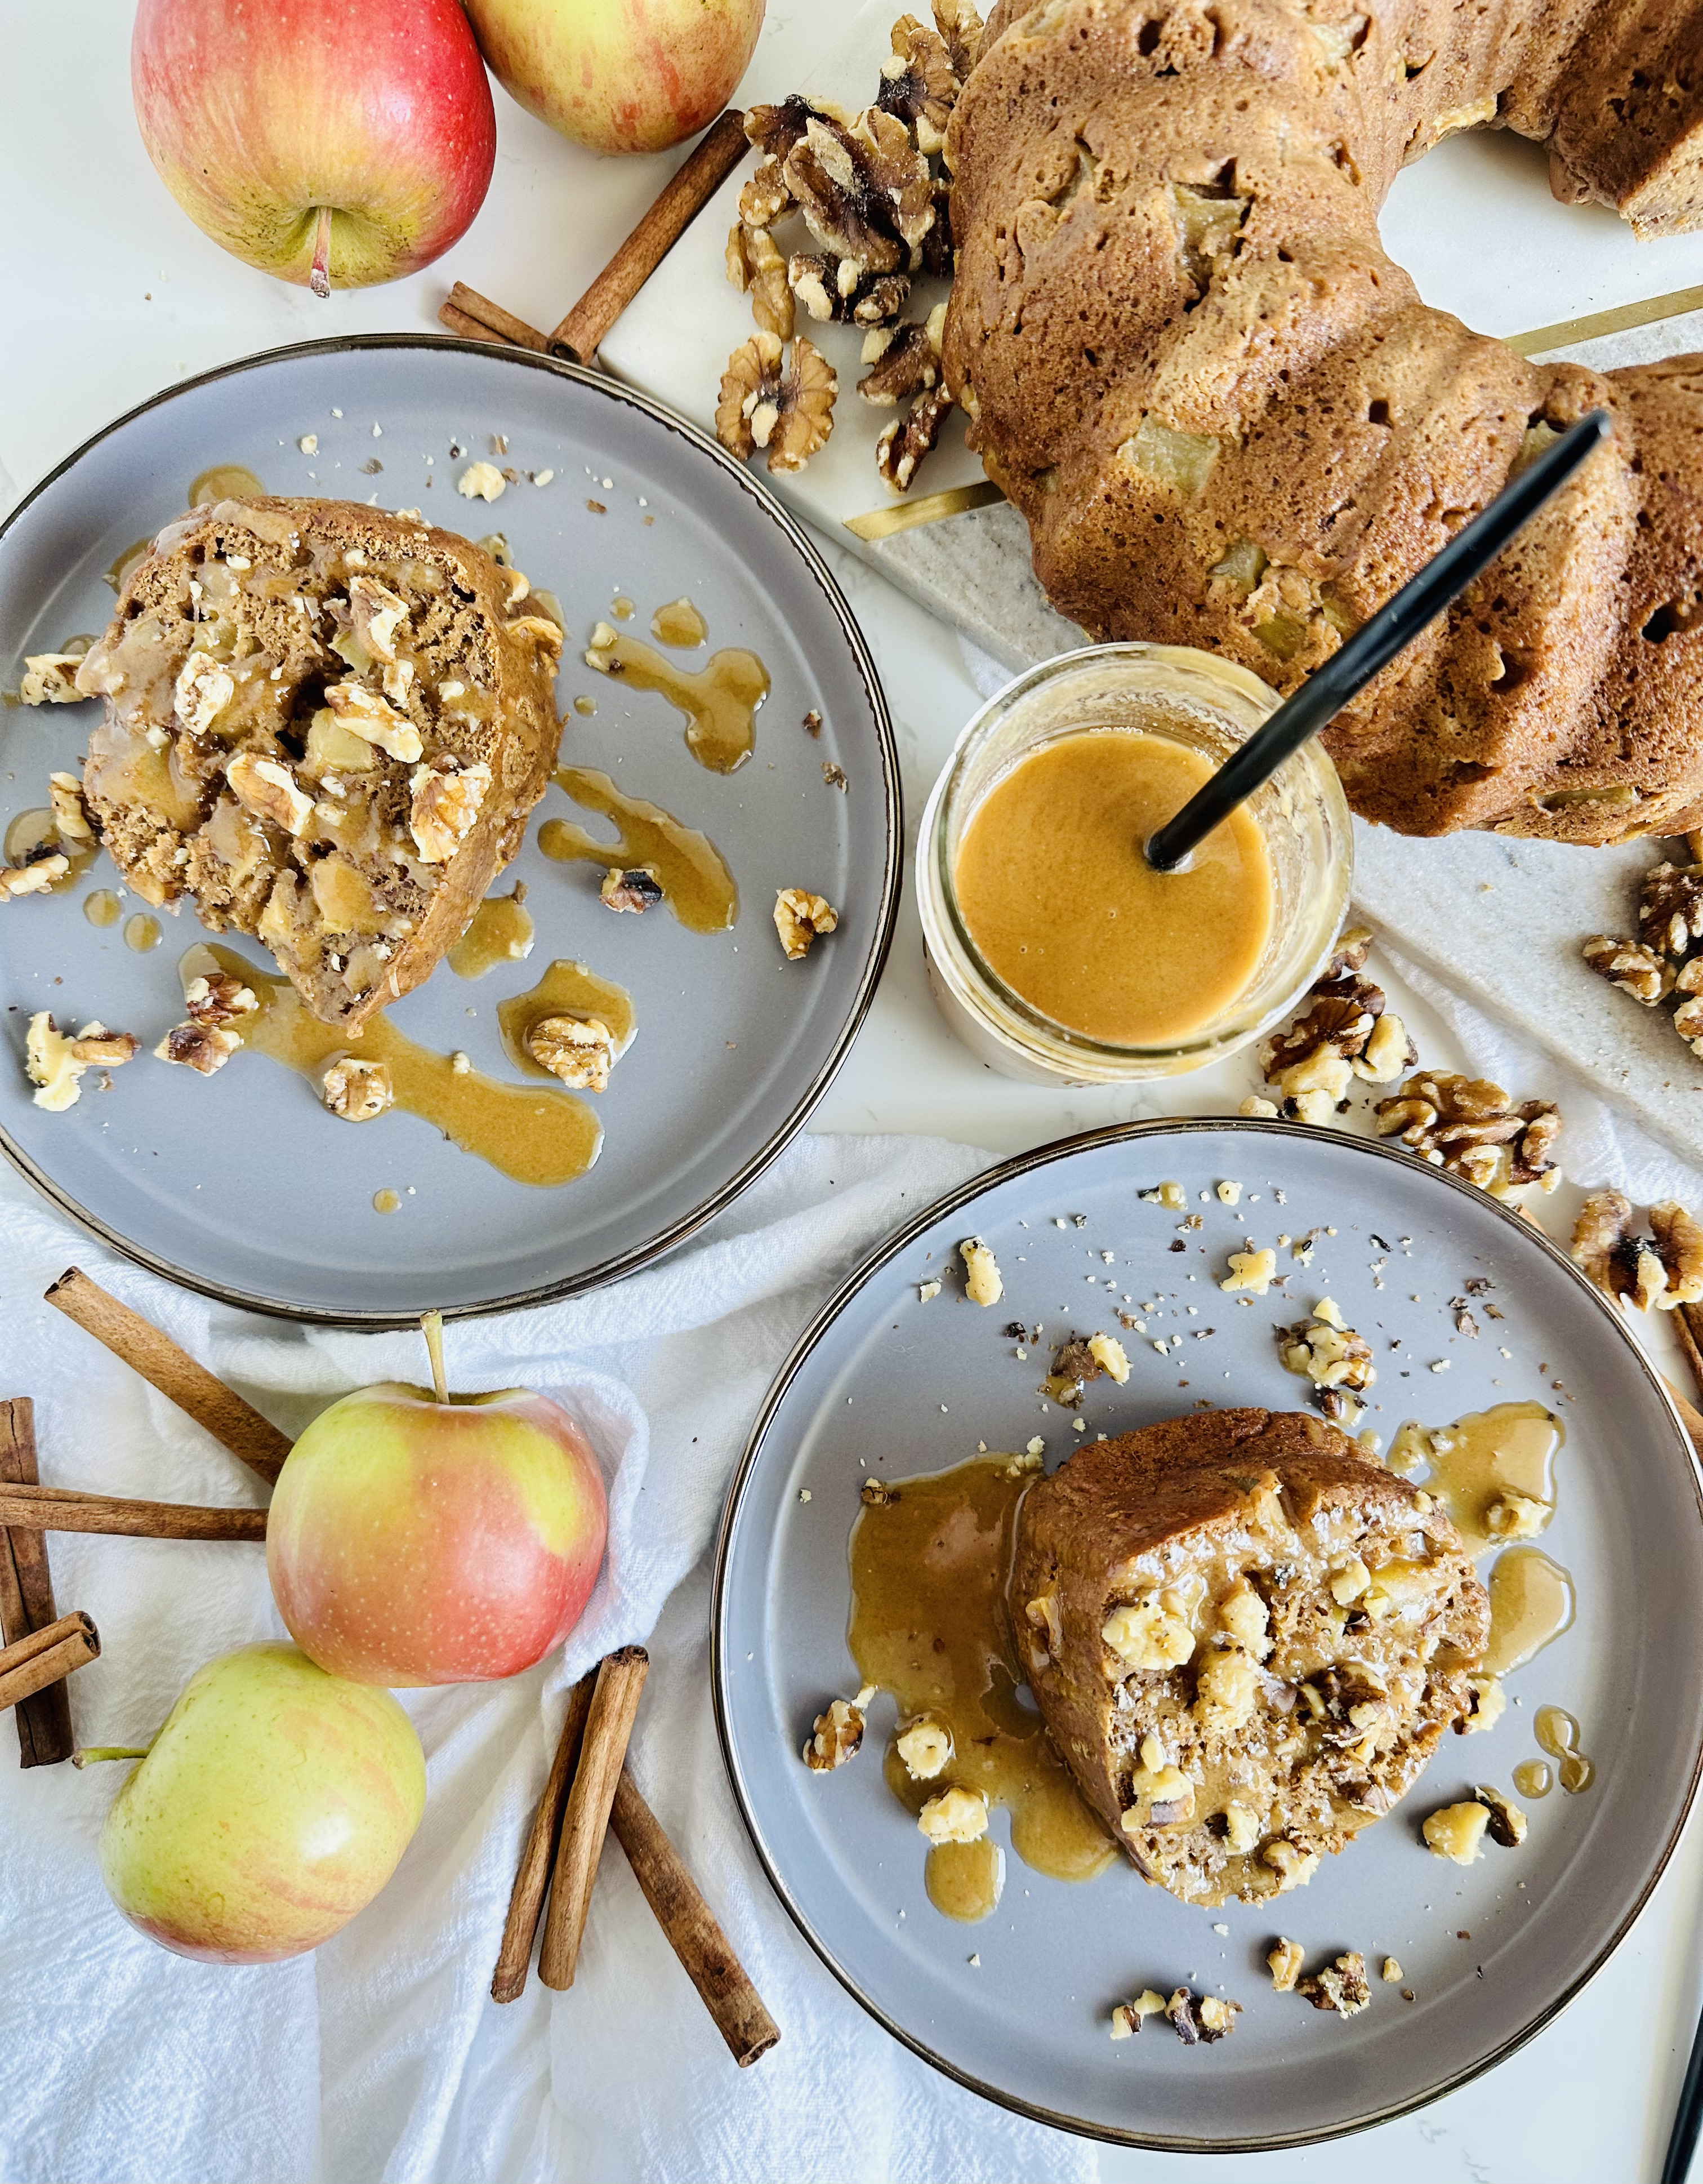 Healthy Apple Cake with Caramel Sauce